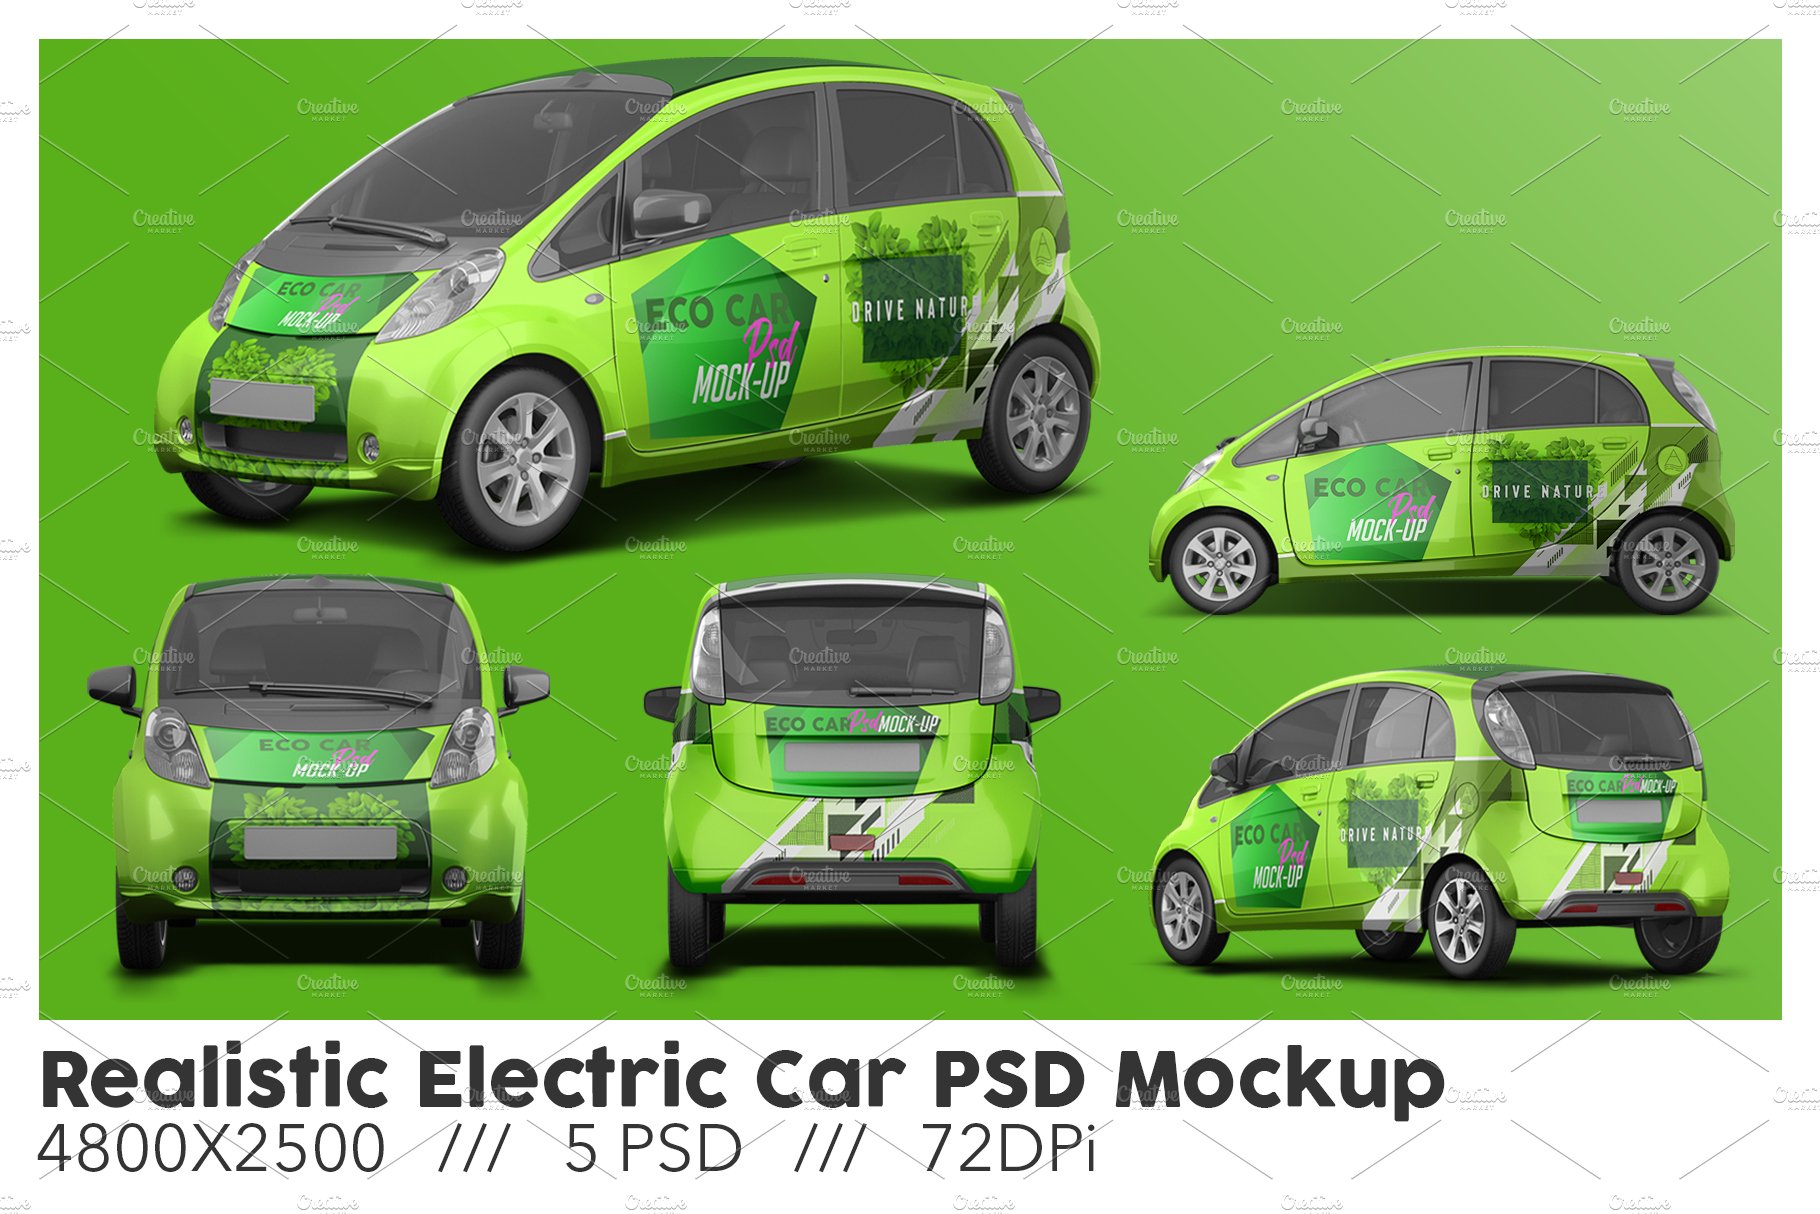 Realistic Electric Car PSD Mockup cover image.